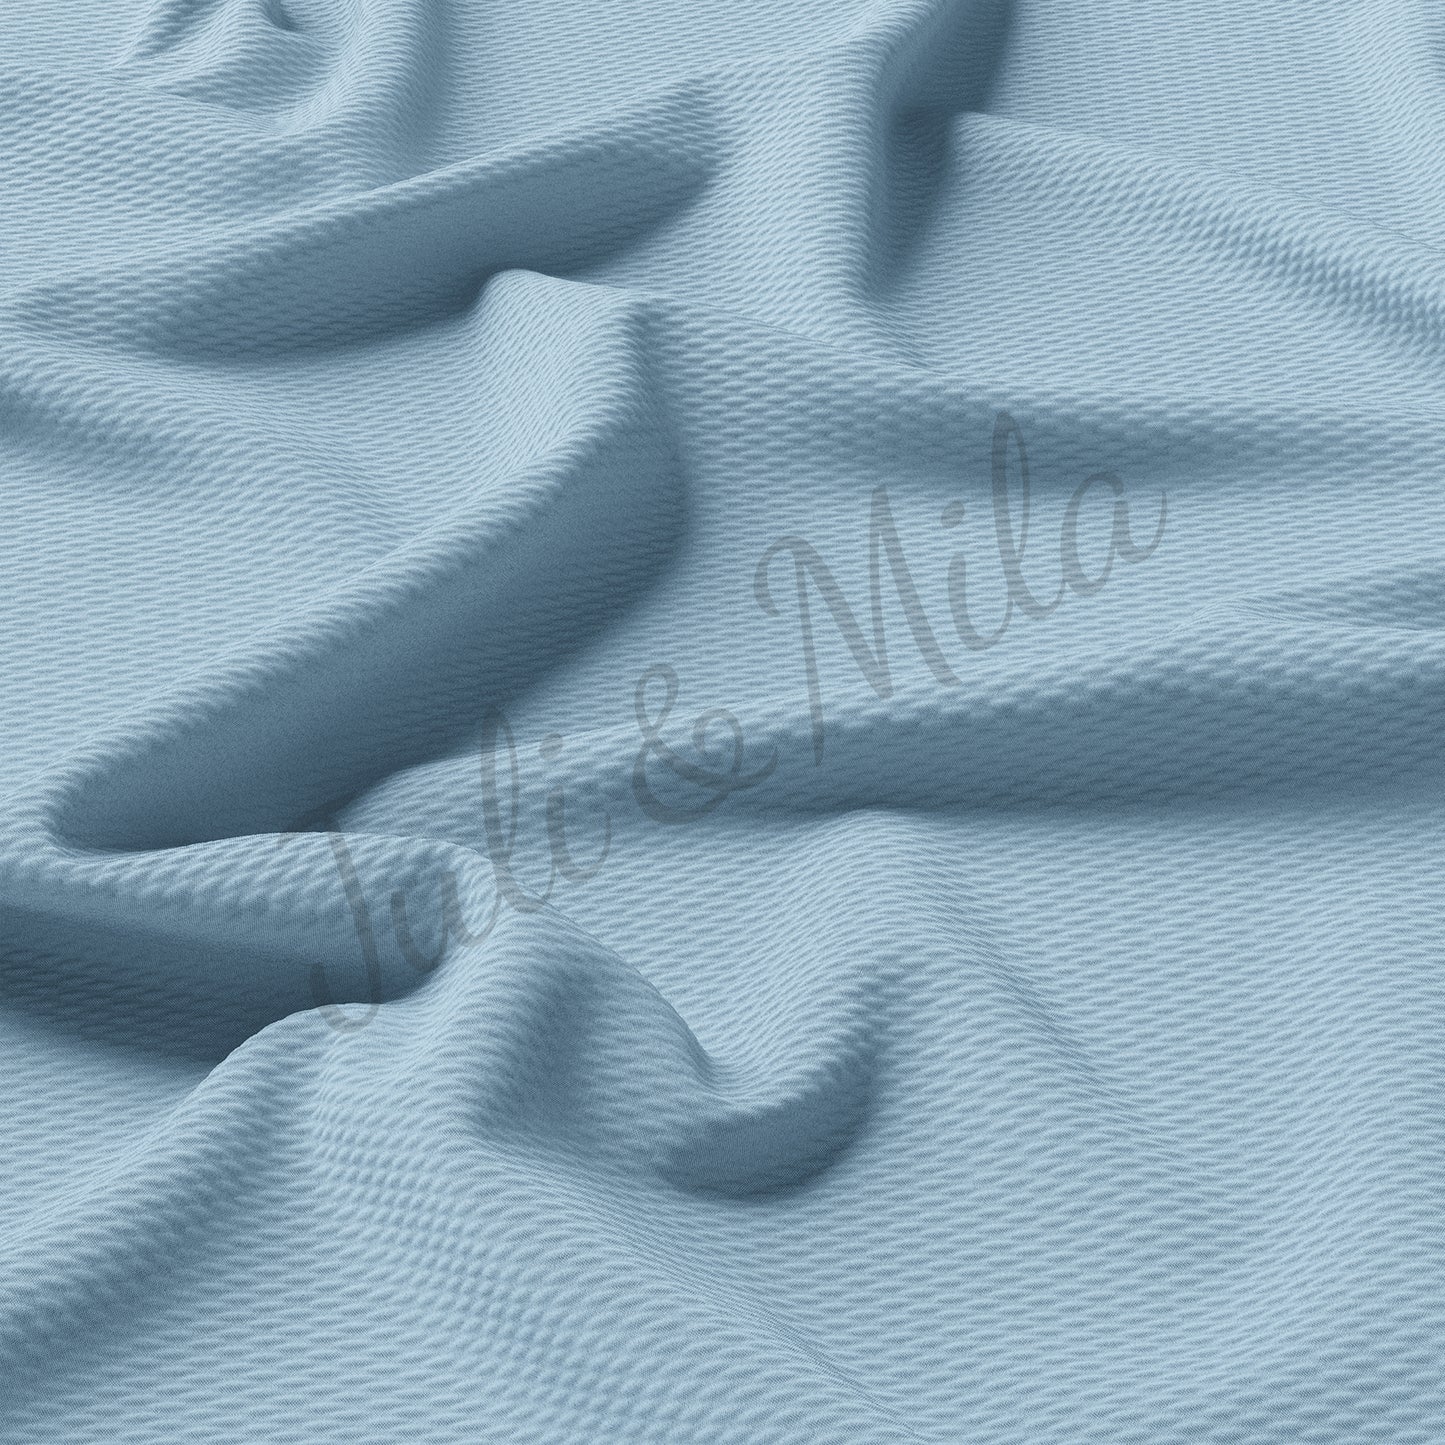 Nile Blue Liverpool Bullet Textured Fabric